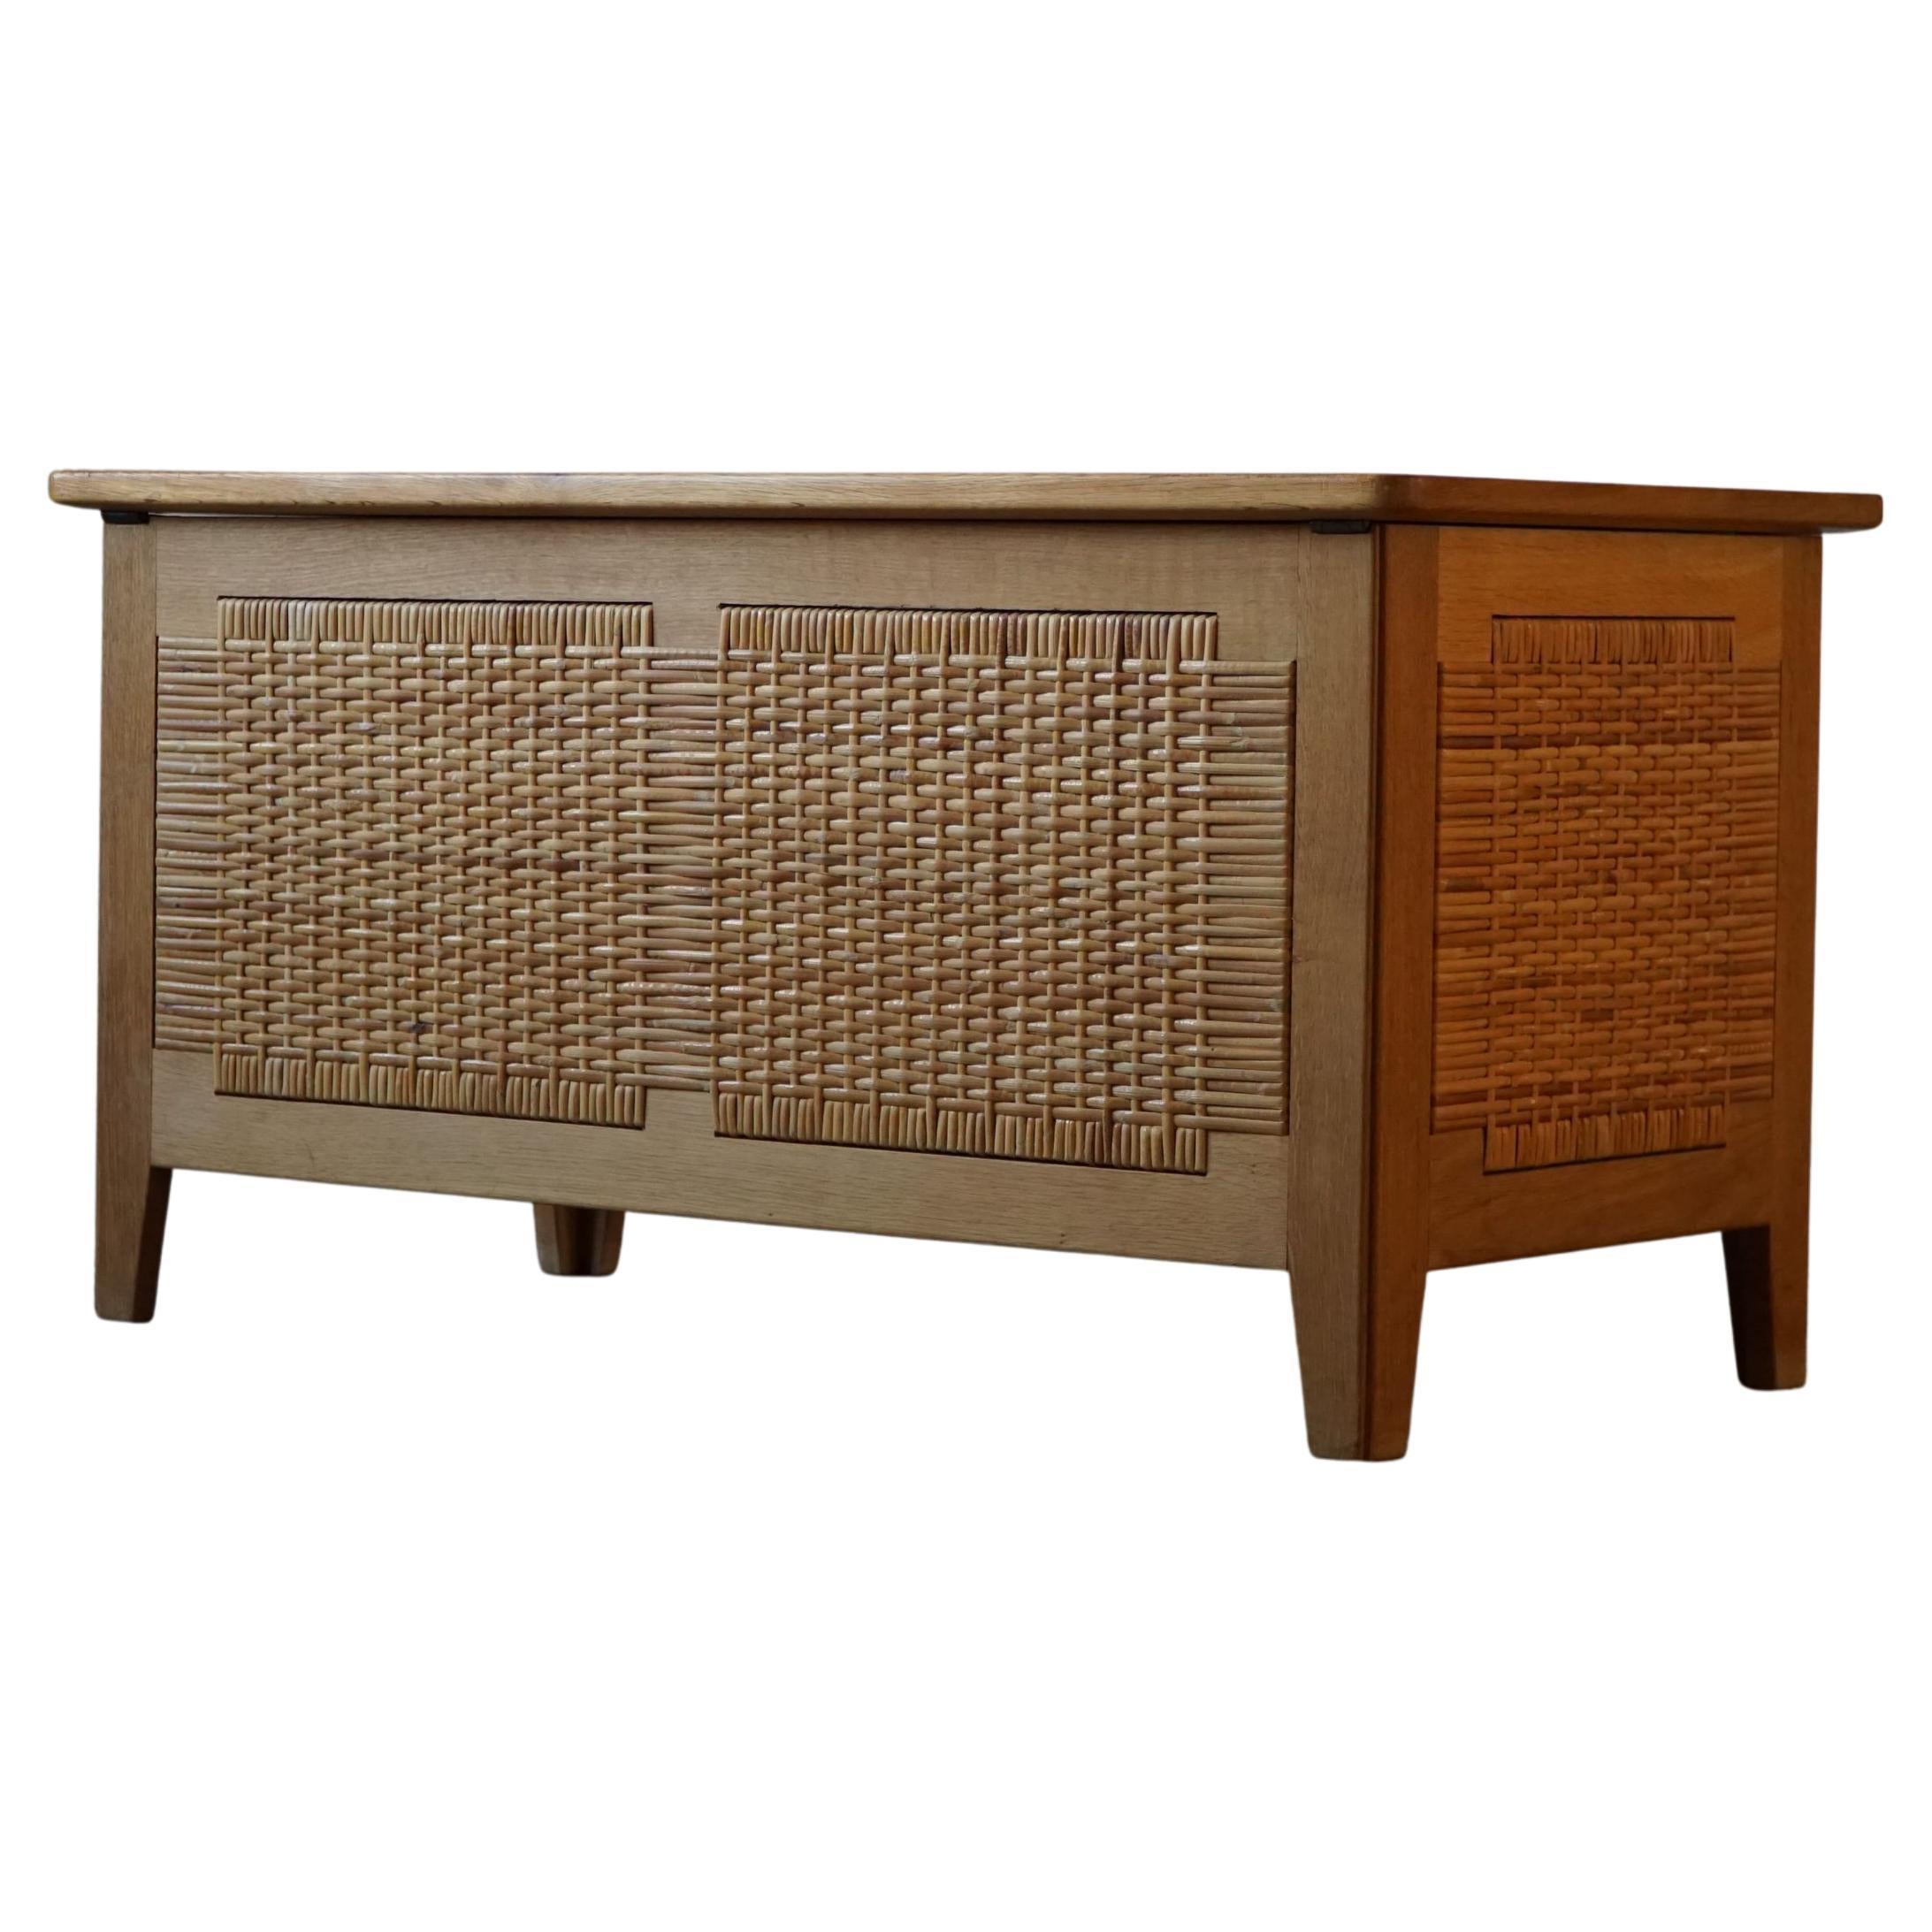 Kai Winding Chest / Bench in Cane & Oak, Made for Poul Hundevad, "Ph52", 1960s